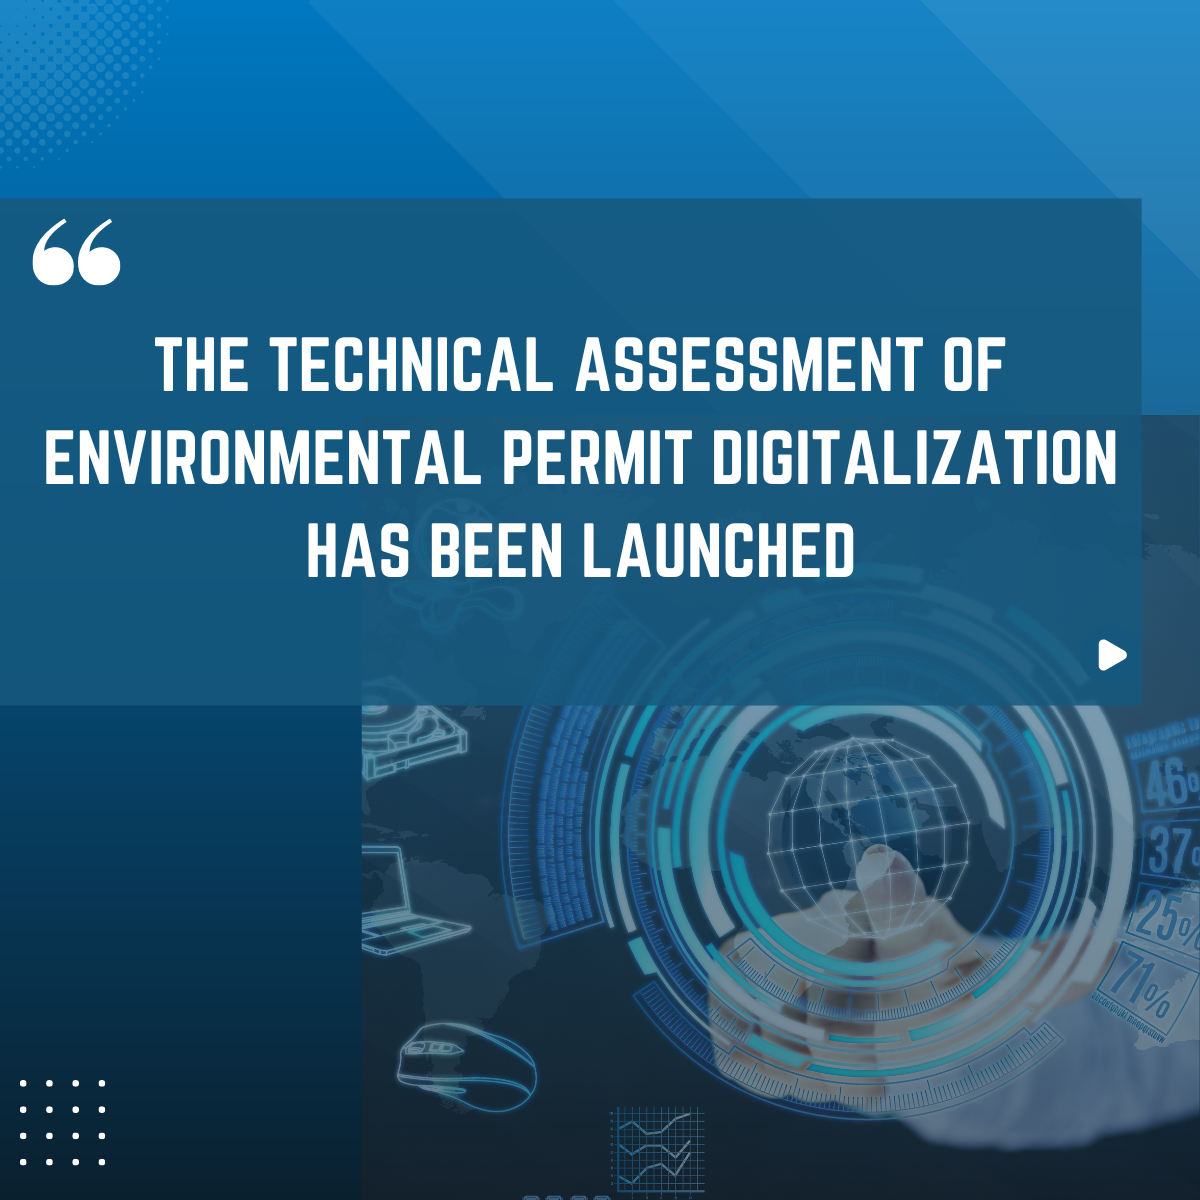 The Technical Assessment Of Environmental Permit Digitalization Has Been Launched